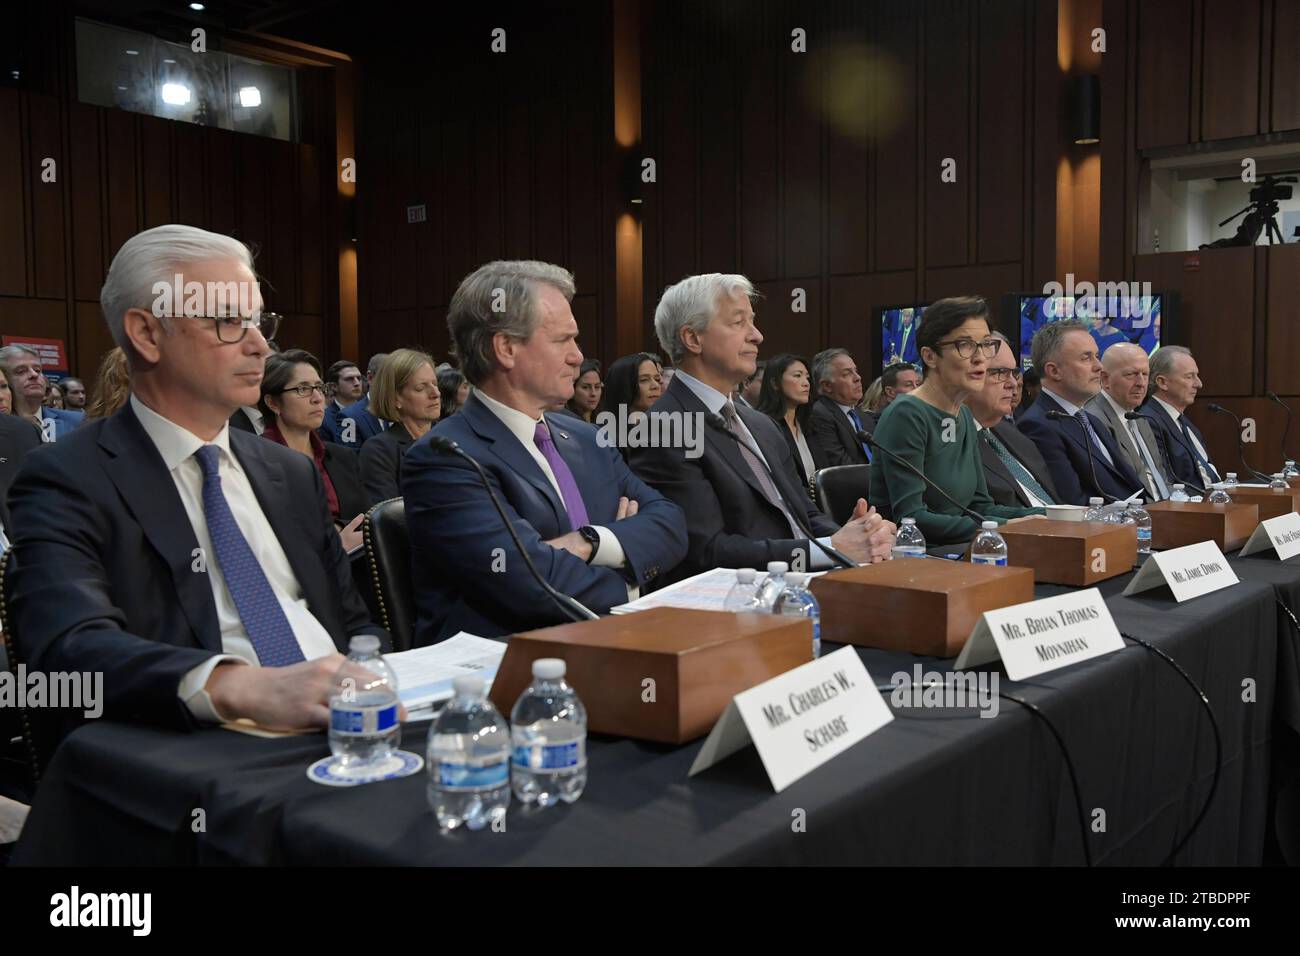 US CEO'S Banking(L-R) Mr. Charles W. Scharf, CEO And President, Wells Fargo & Company; Mr. Brian Thomas Moynihan, Chairman And CEO, Bank of America; Mr. Jamie Dimon, Chairman And CEO, JPMorgan Chase & Co.; Ms. Jane Fraser, CEO, Citigroup; Mr. Ronald O'Hanley, CEO, State Street; Mr. Robin Vince, CEO, BNY Mellon; Mr. David Solomon, CEO, Goldman Sachs; Mr. James P. Gorman, CEO, Morgan Stanley testify before Senate Banking, Housing, and Urban Affairs Committee about oversight to examine Wall Street firms during a hearing; today on December 06, 2023 at Senate Hart/Capitol Hill in Washington DC, USA Stock Photo